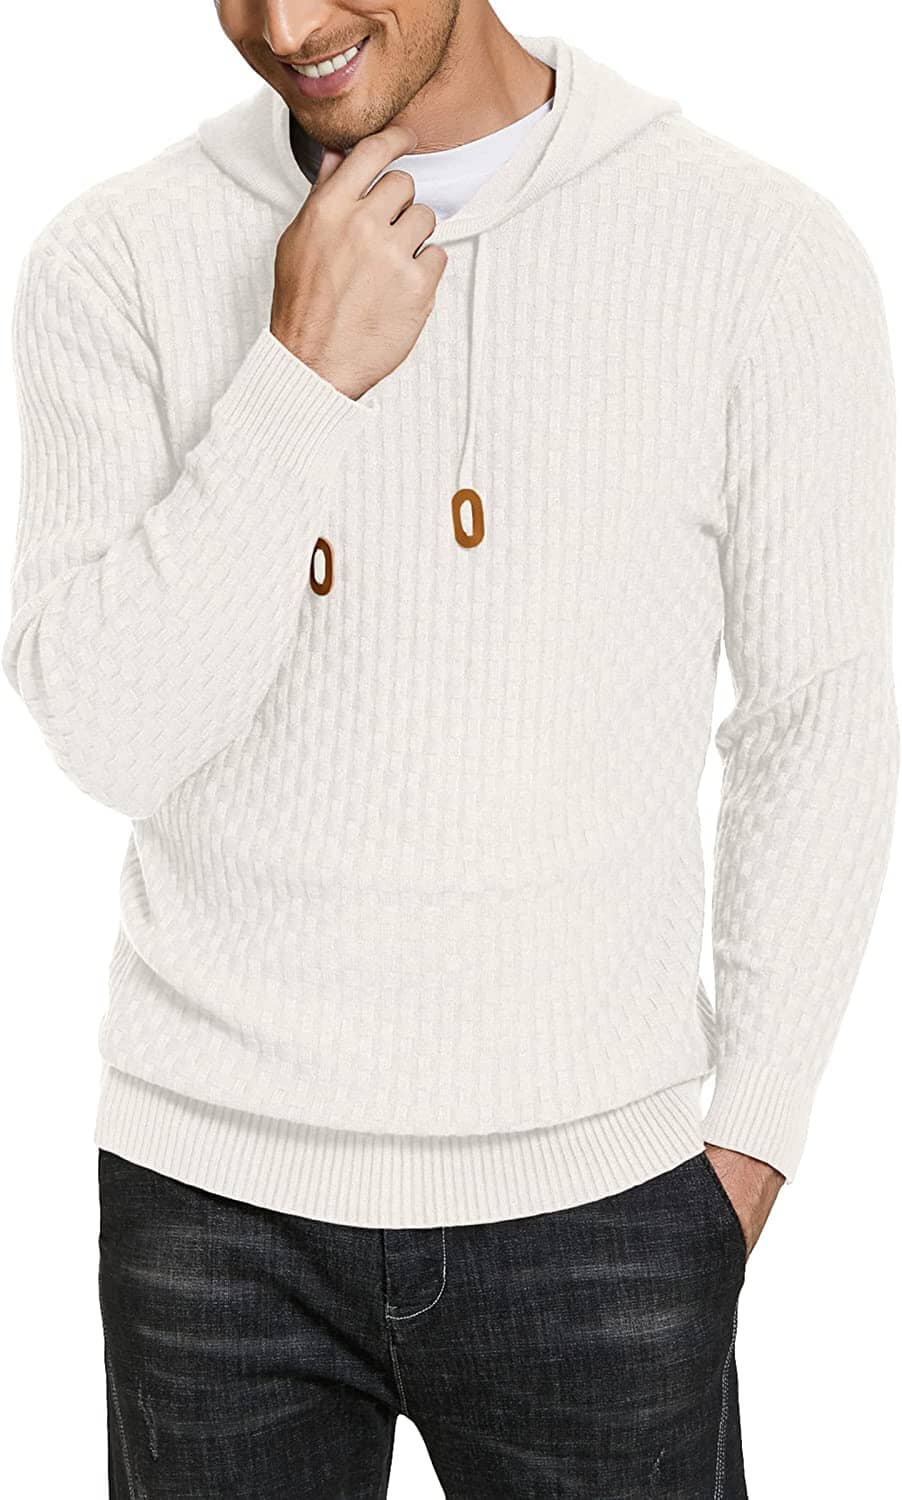 Solid Knitted Pullover Hooded Sweatshirt (US Only) Hoodies Brand: COOFANDY White S 